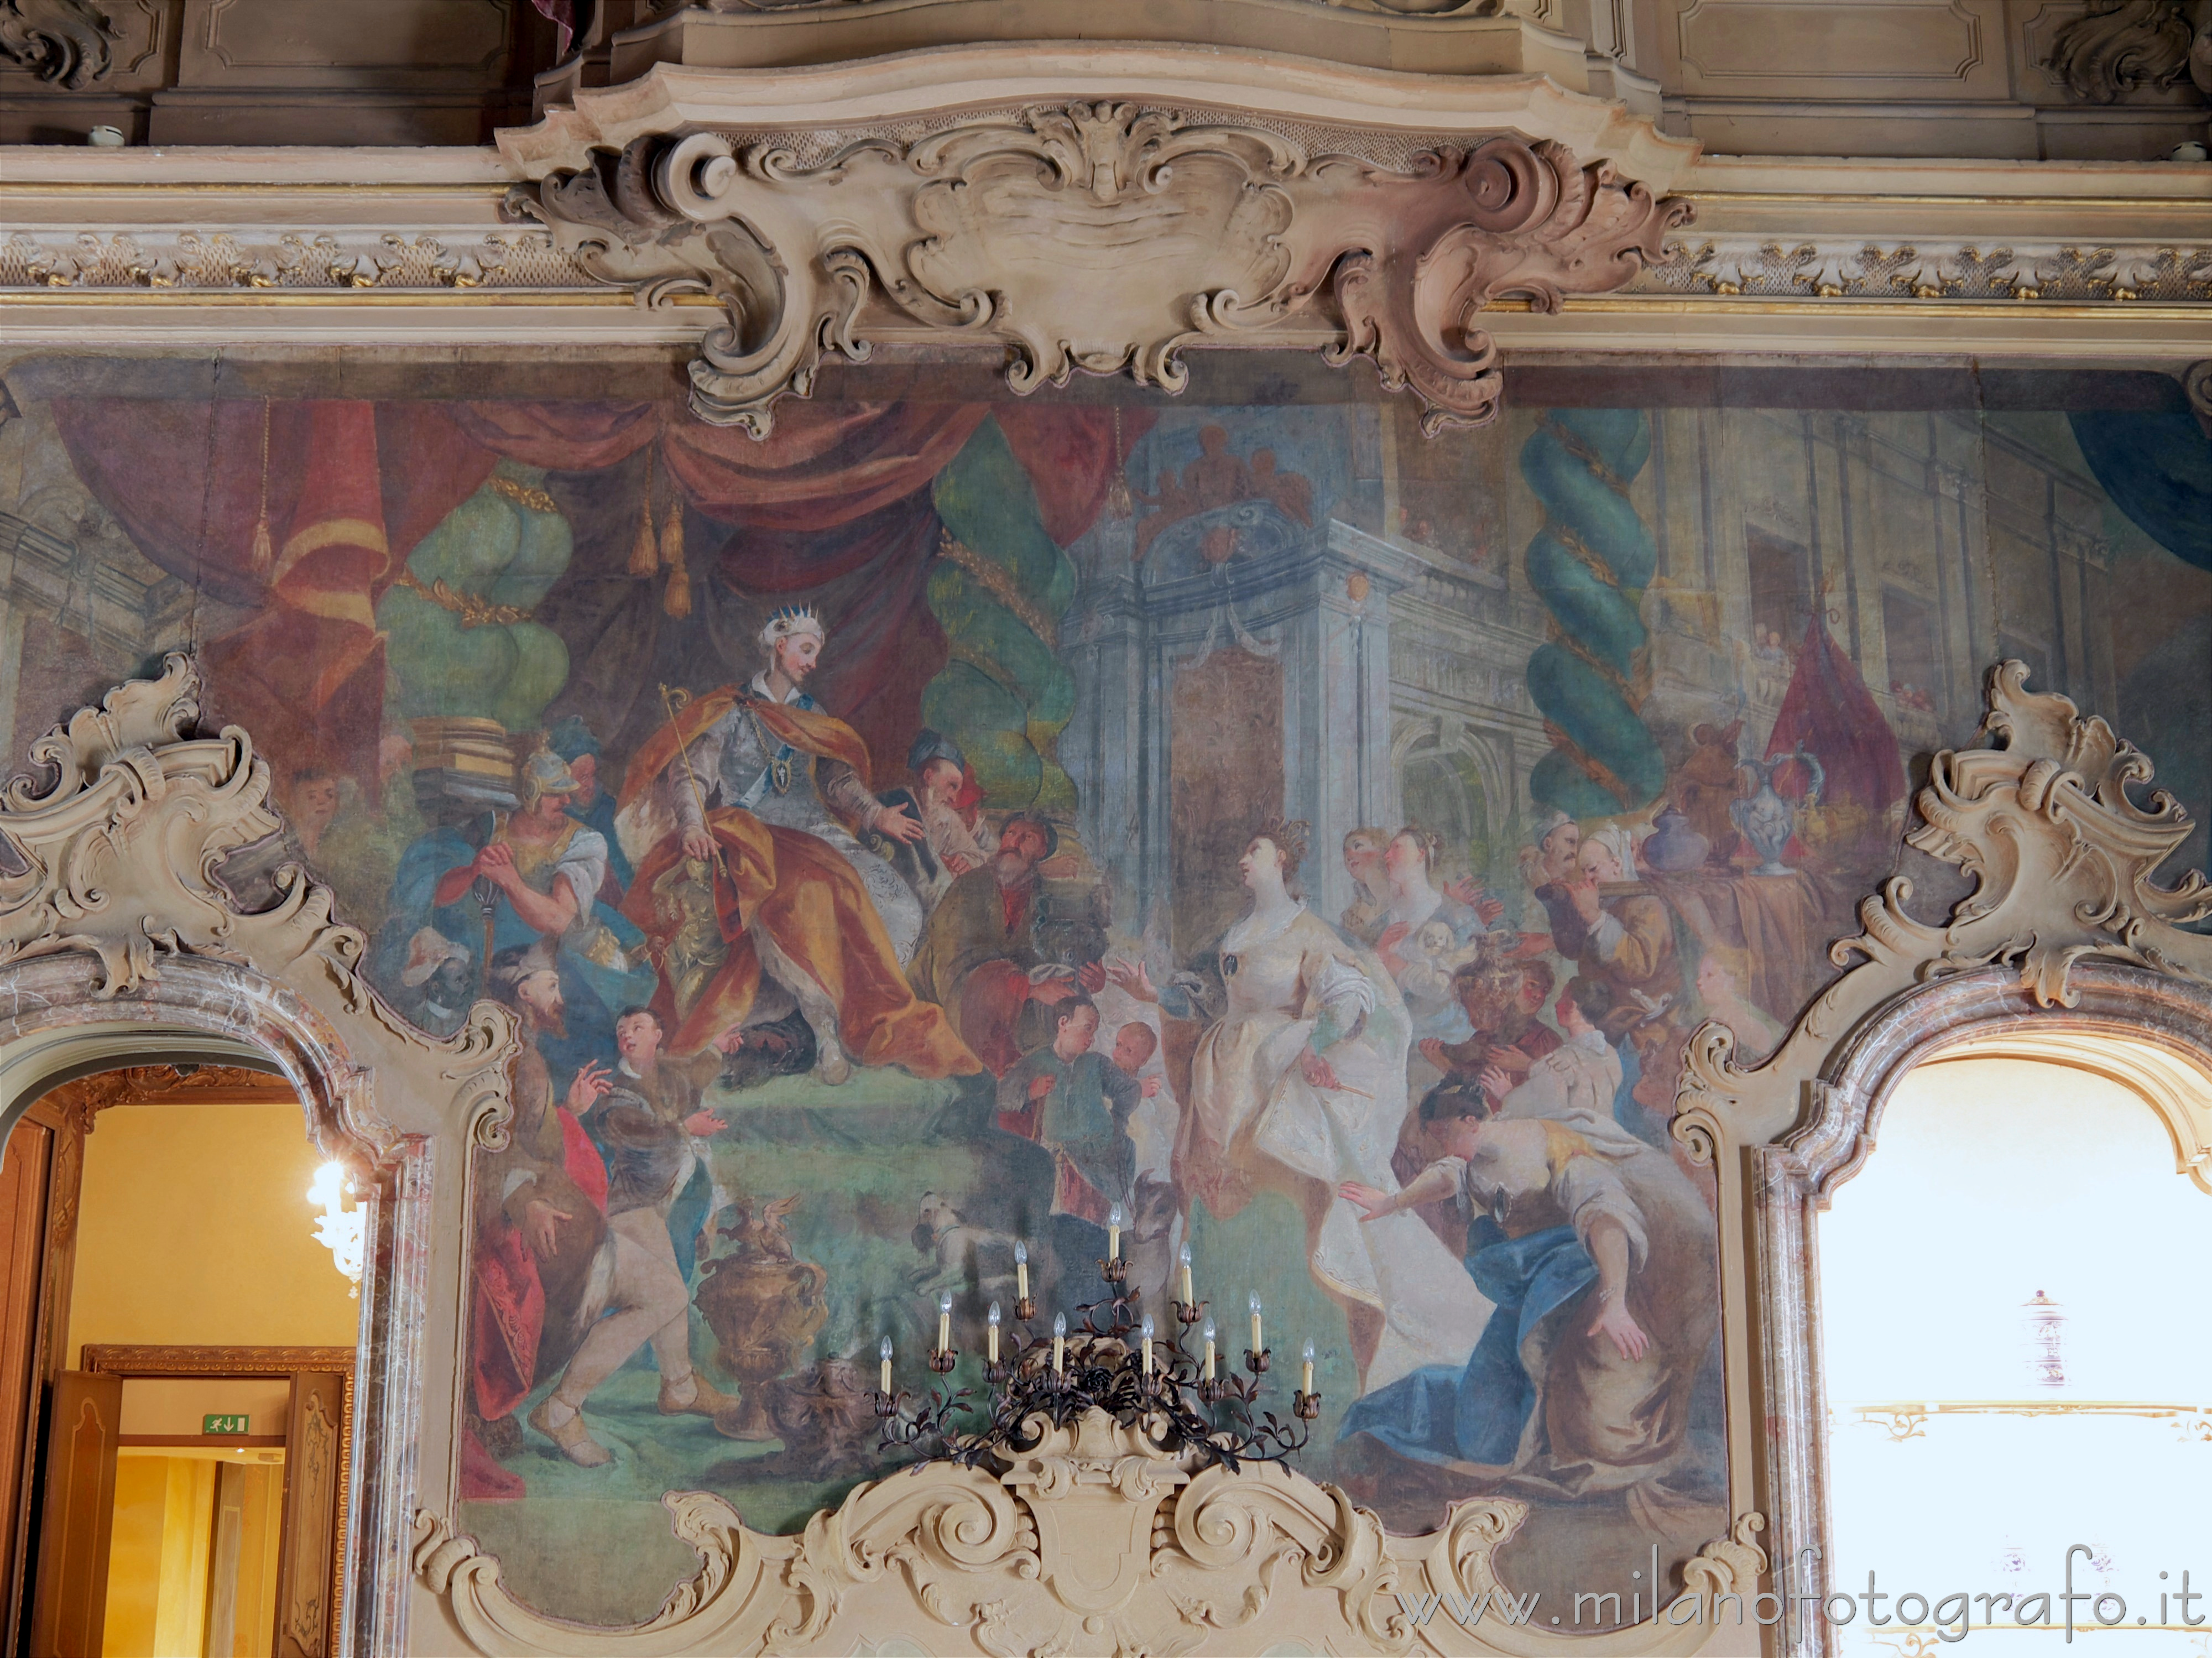 Milan (Italy): Telero in Visconti Palace depicting the Encounter between the King Solomon and the Queen of Saba - Milan (Italy)